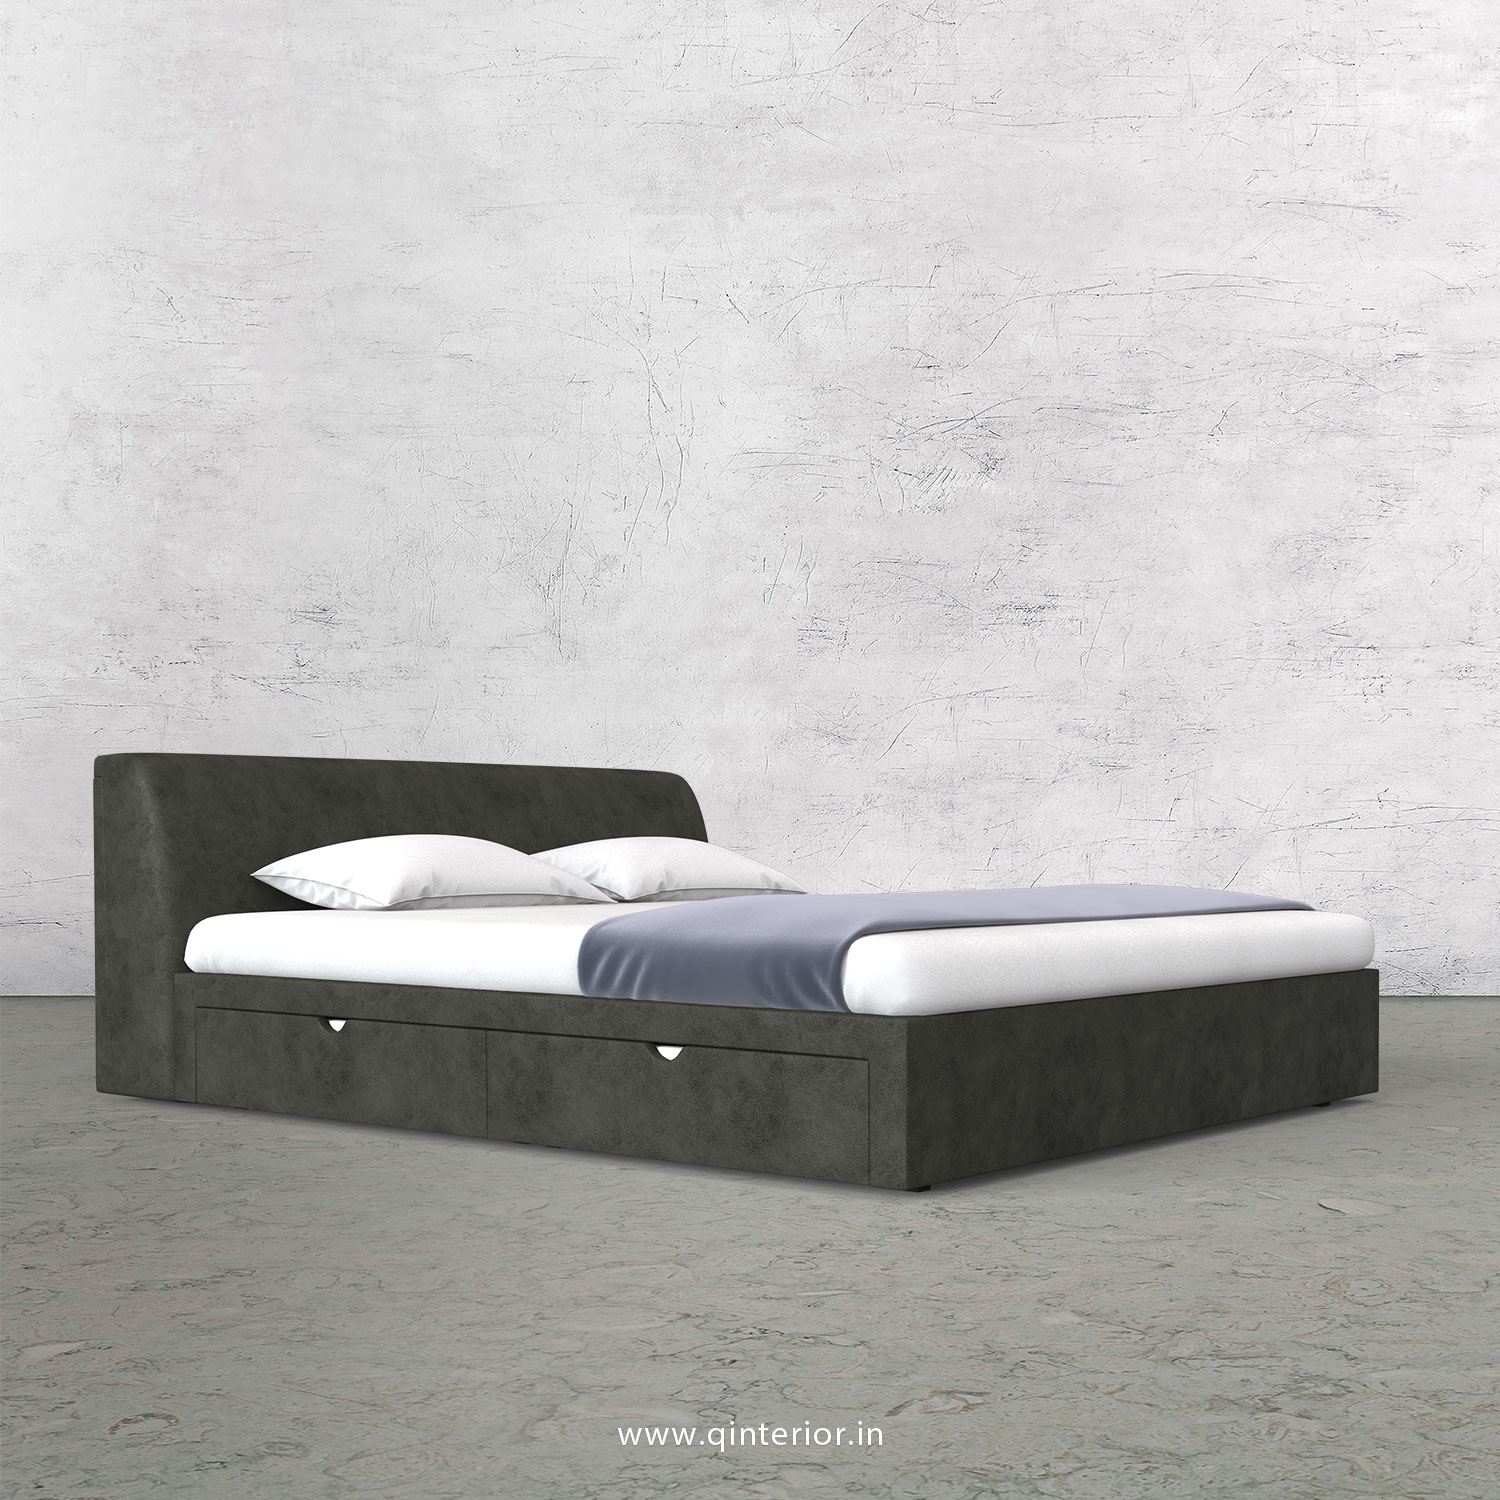 Luxura Queen Storage Bed in Fab Leather Fabric - QBD007 FL07